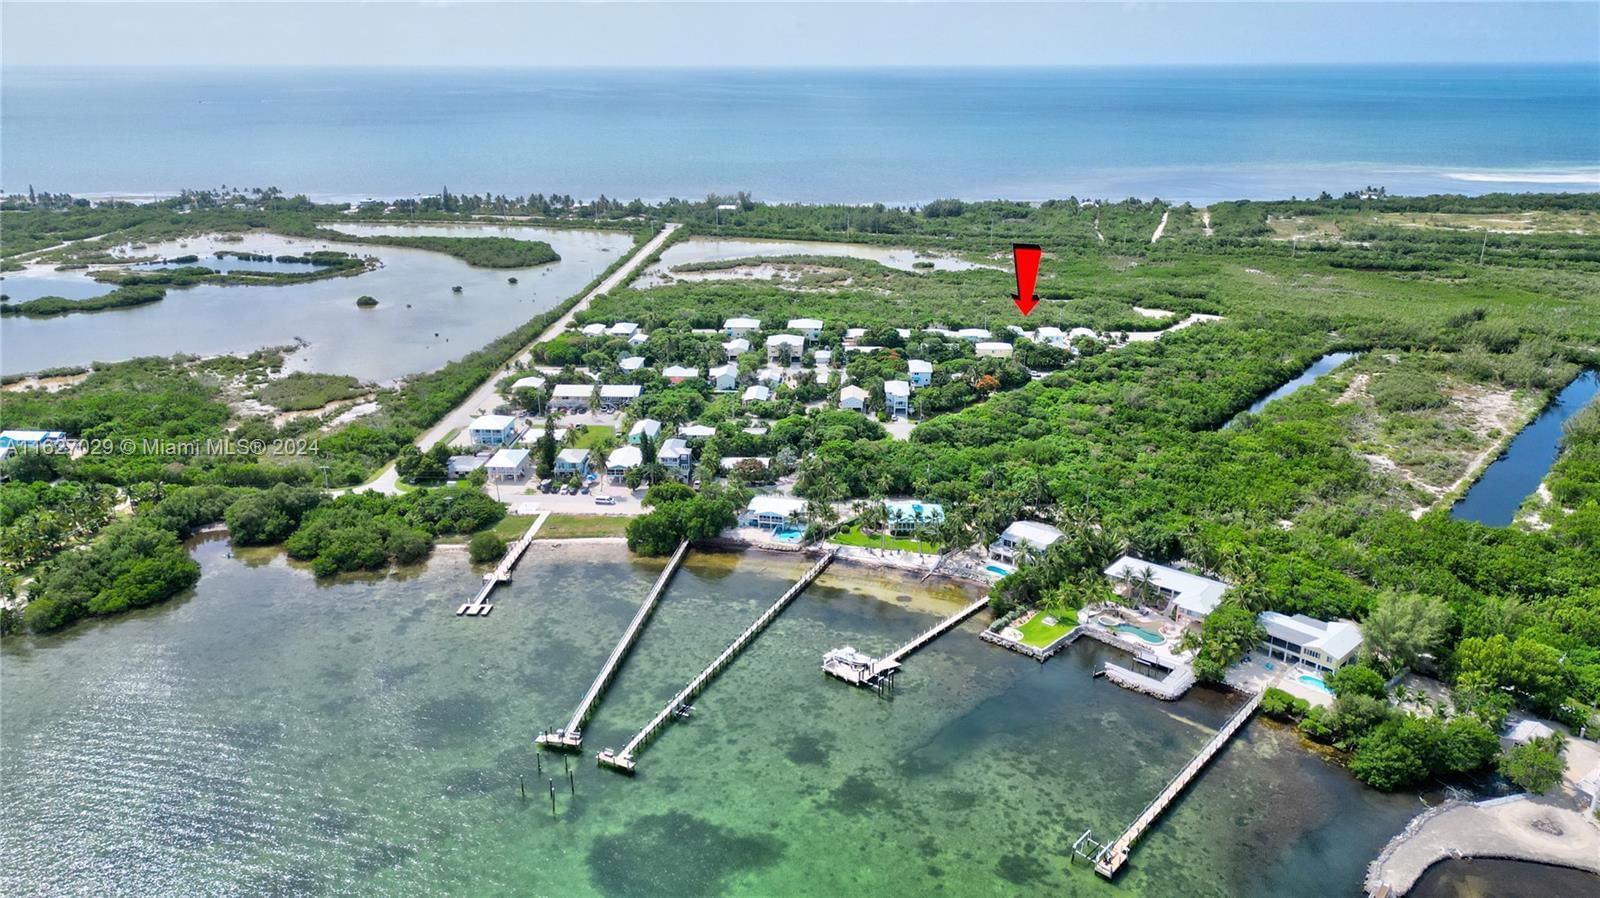 Real estate property located at 57433 Goodley St, Monroe County, Sunset Bay (56), Marathon, FL